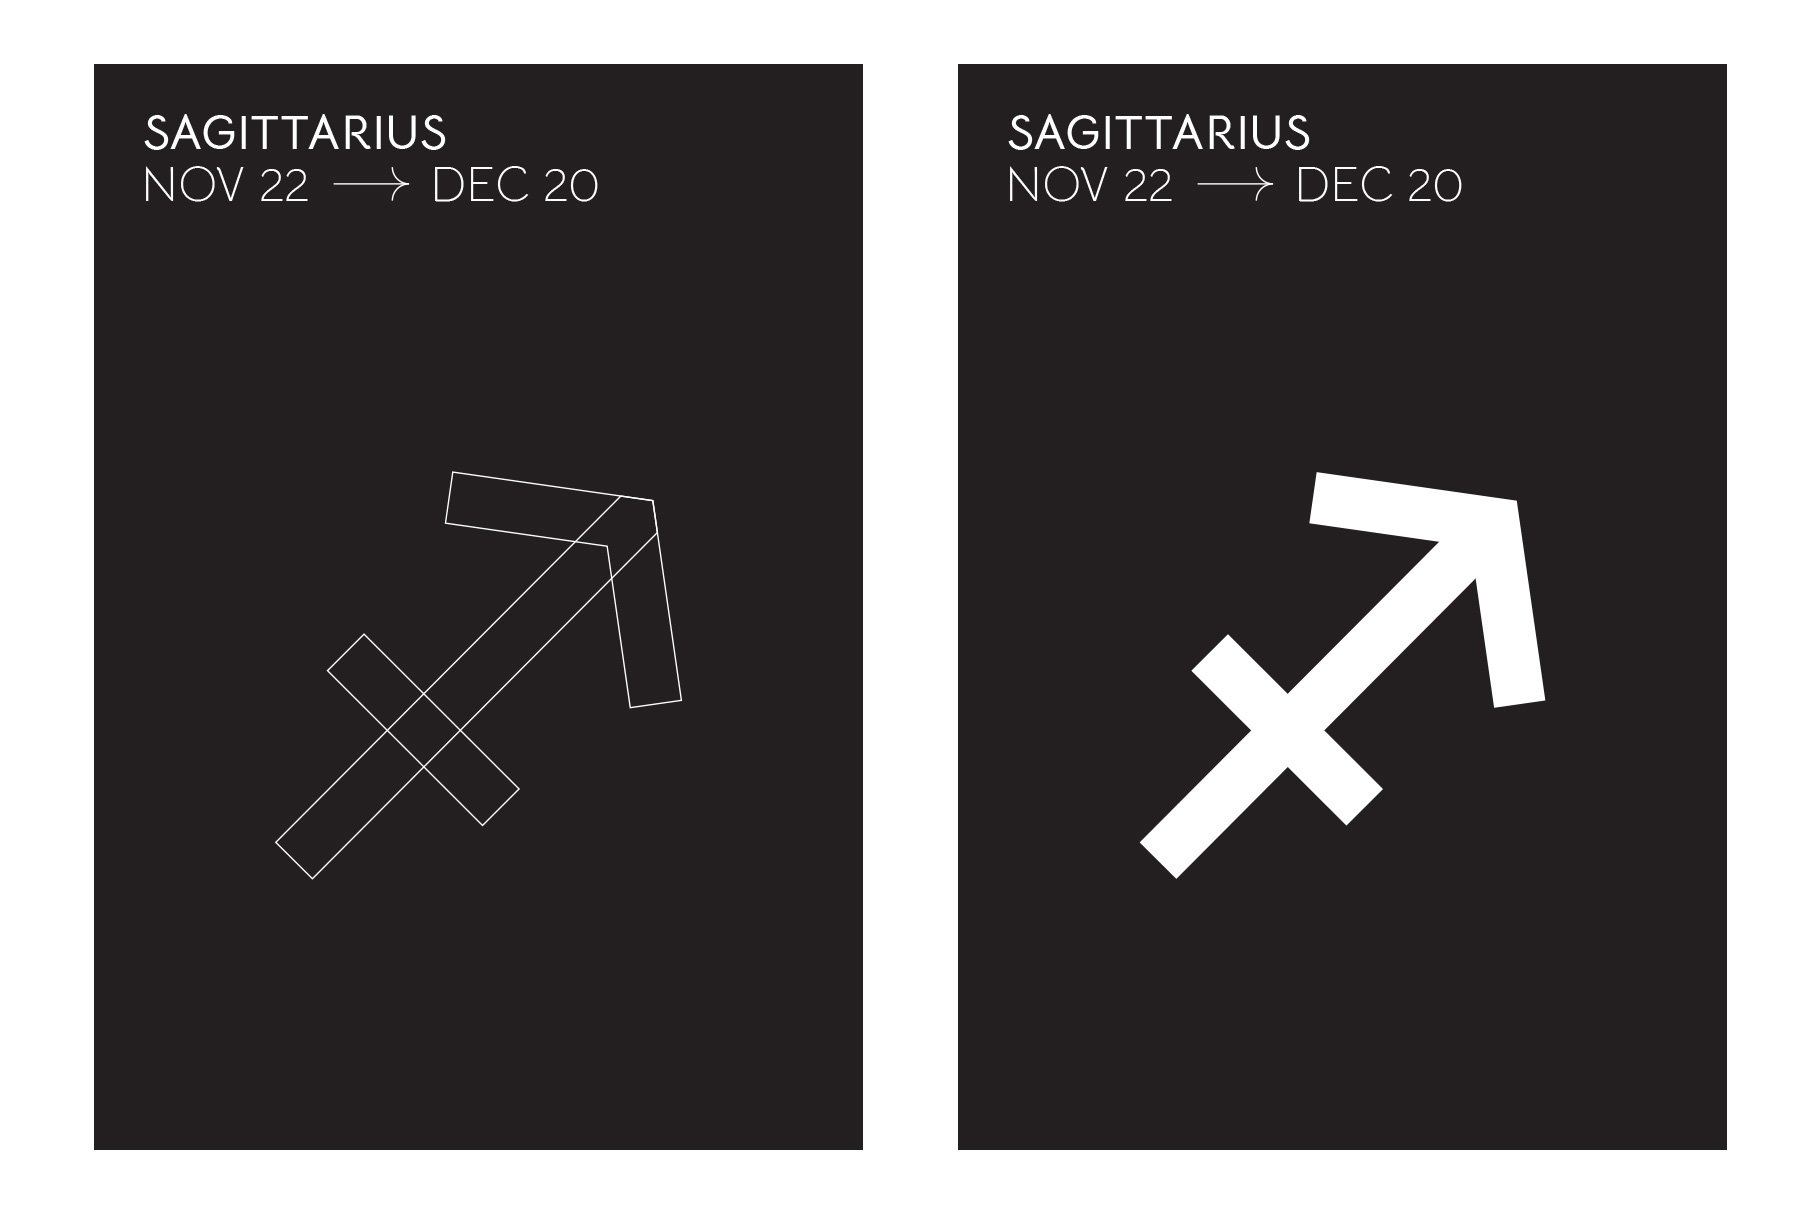 Outline and bold white sagittarius graphic.